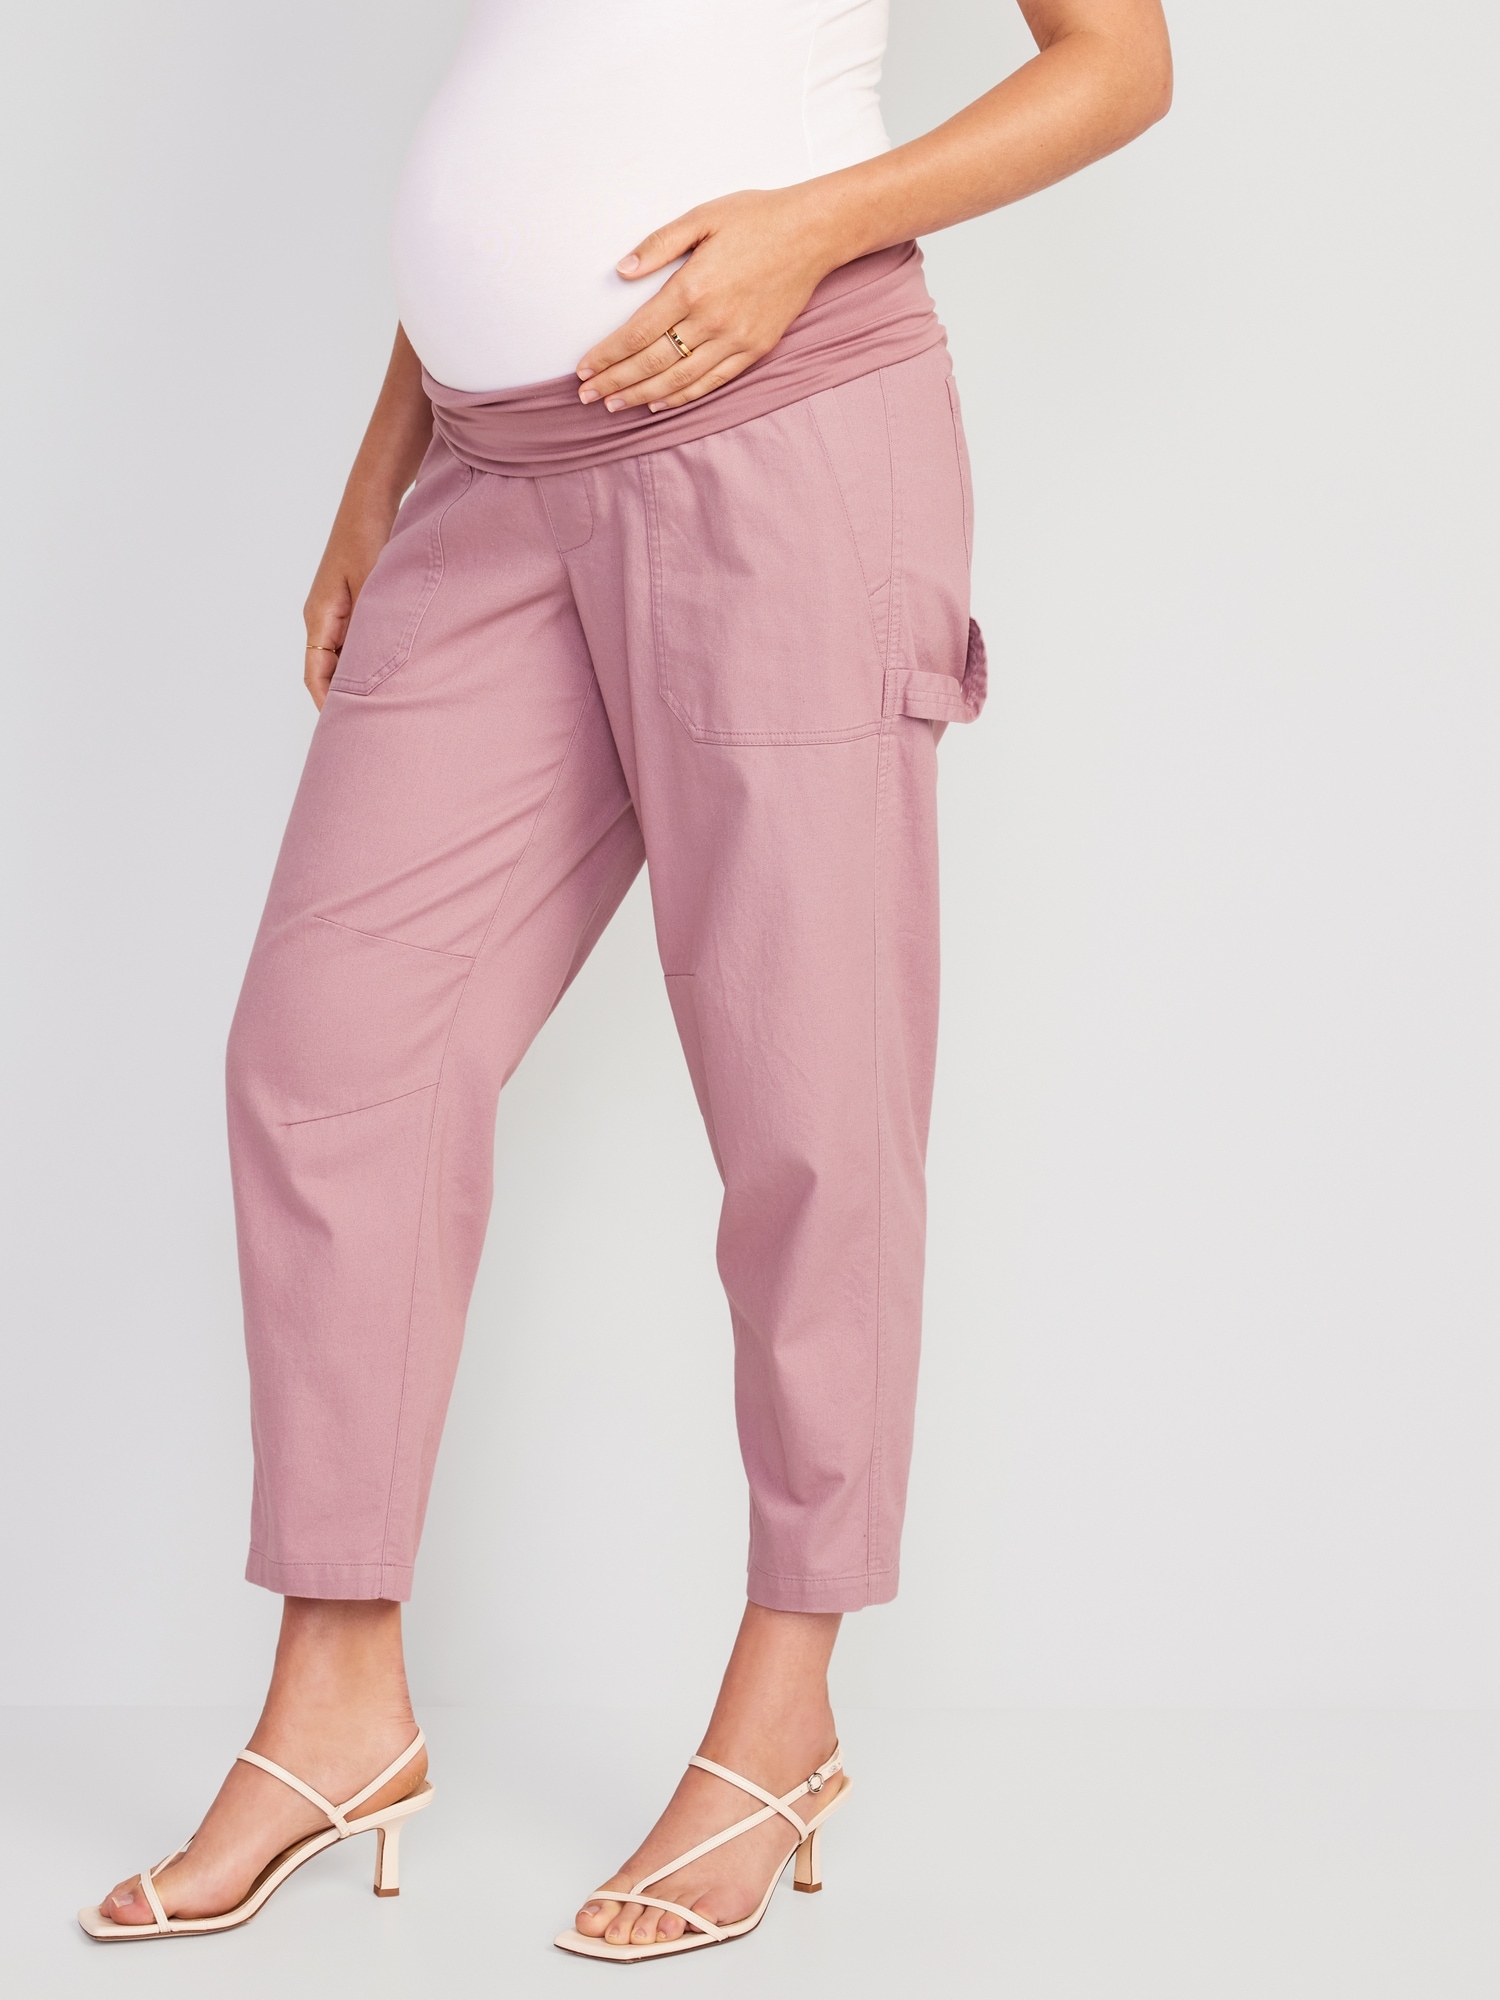 Maternity Rollover-Waist Workwear Pants Old Navy, 54% OFF